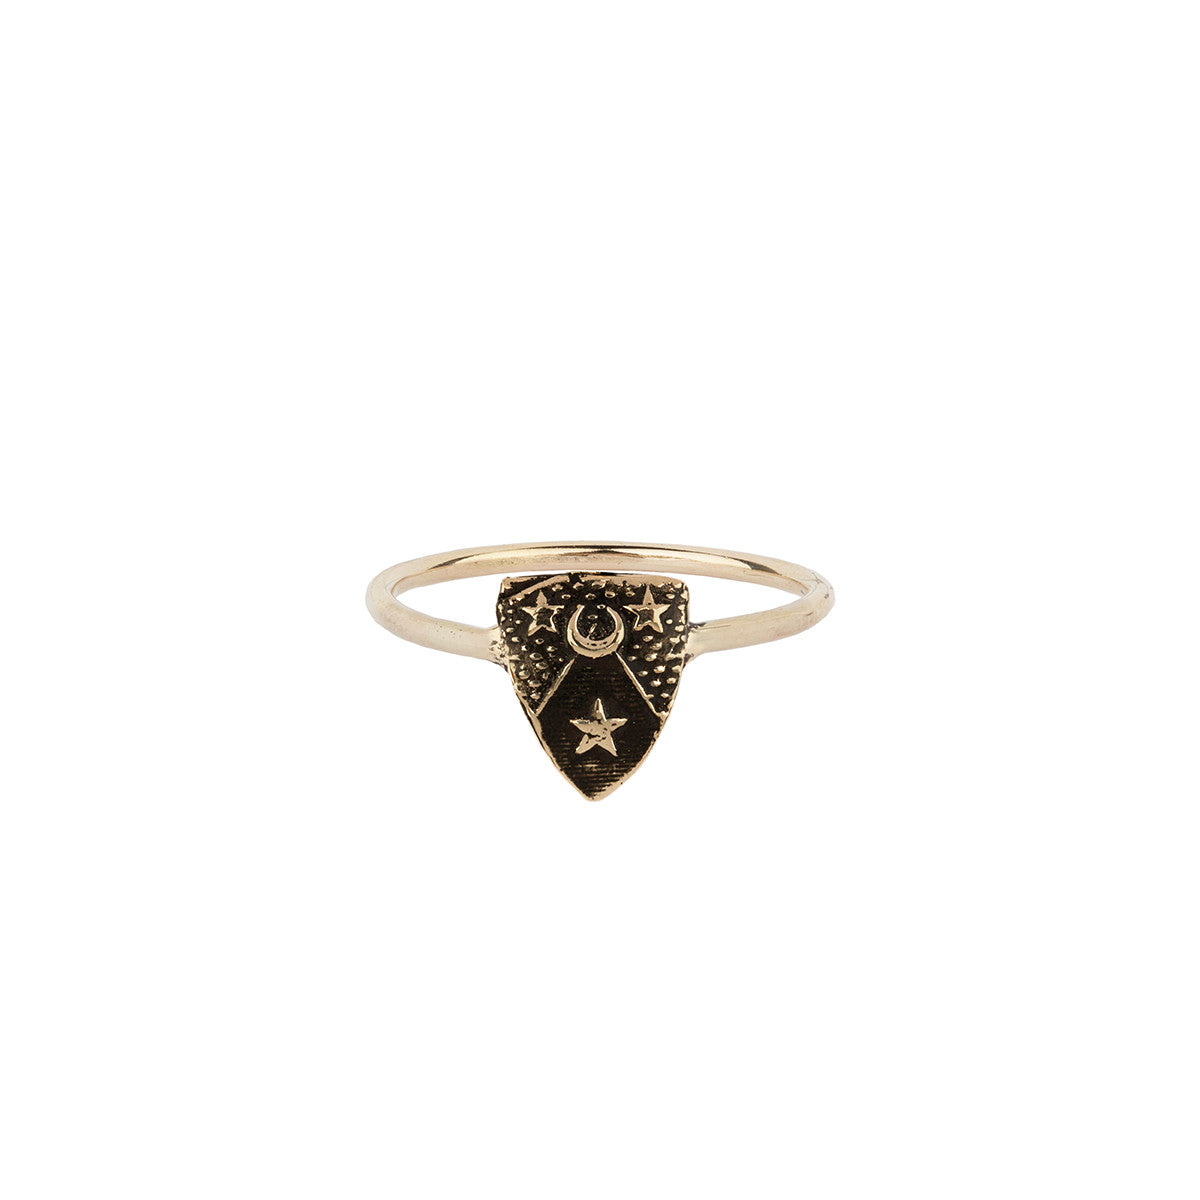 A 14k gold band ring with our gold Moon and Stars mini talisman.